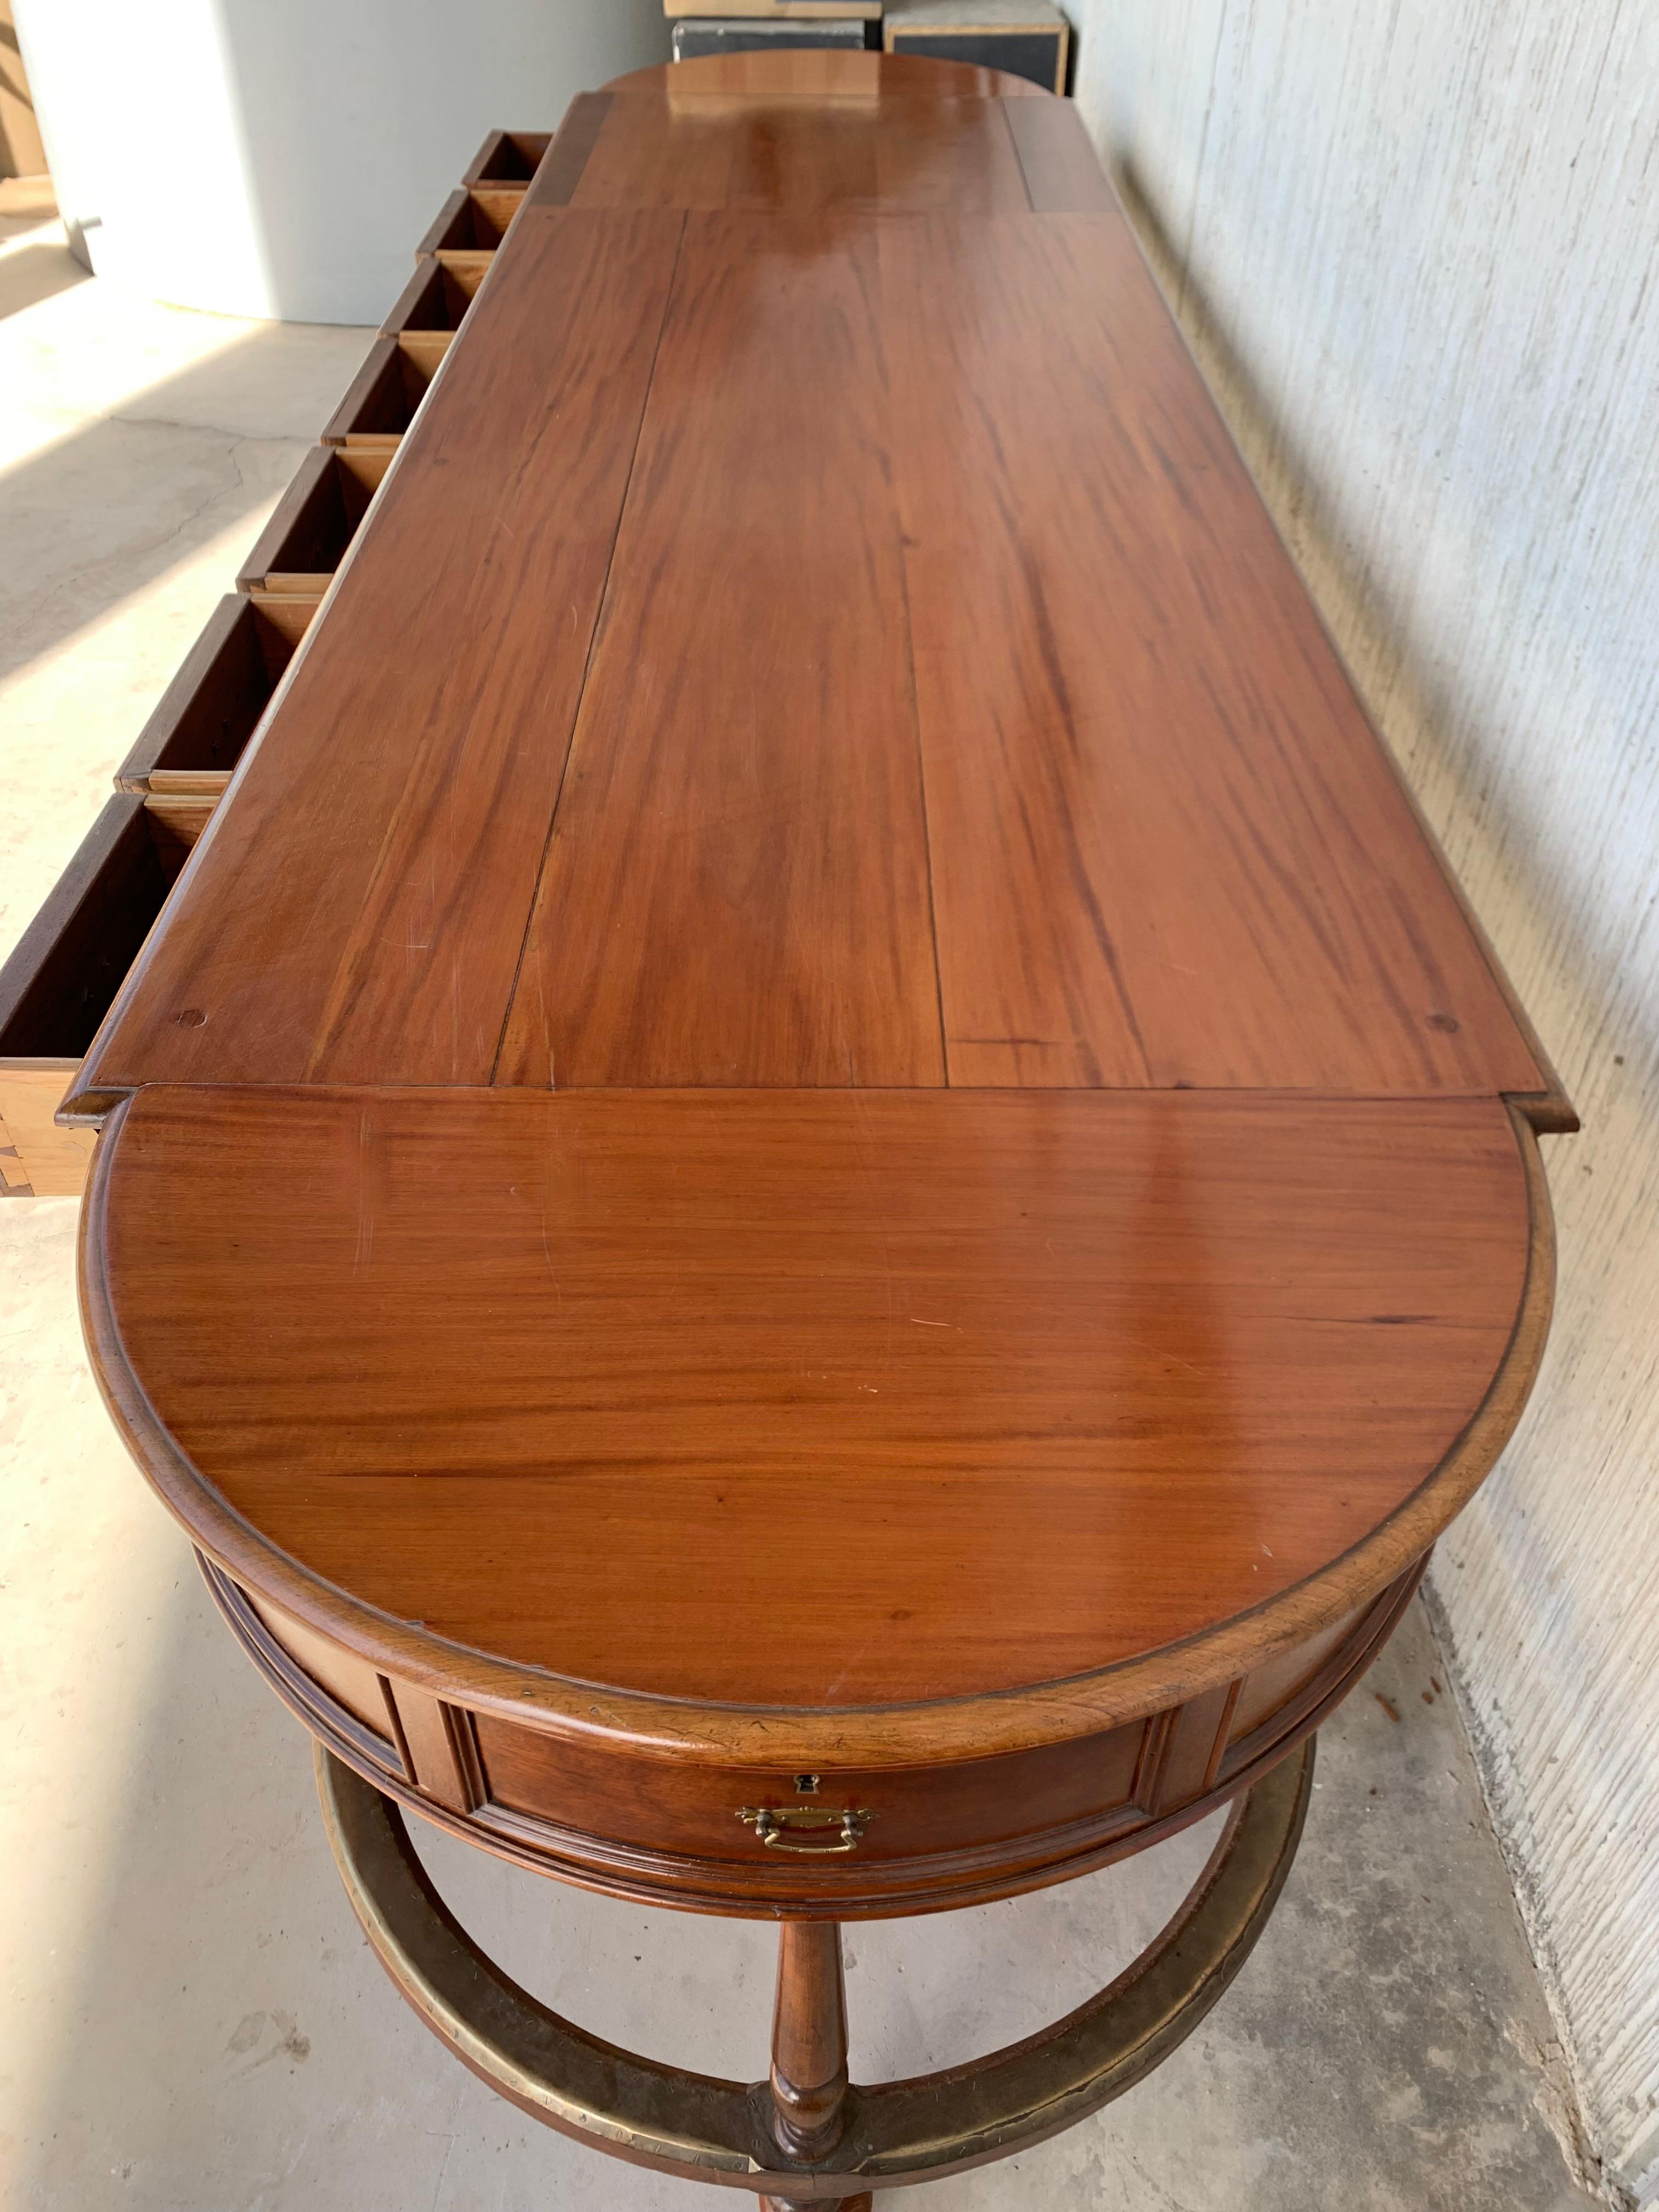 12 Foot Oval Center Table with Drawers in Both Sides, 20th Century For Sale 7